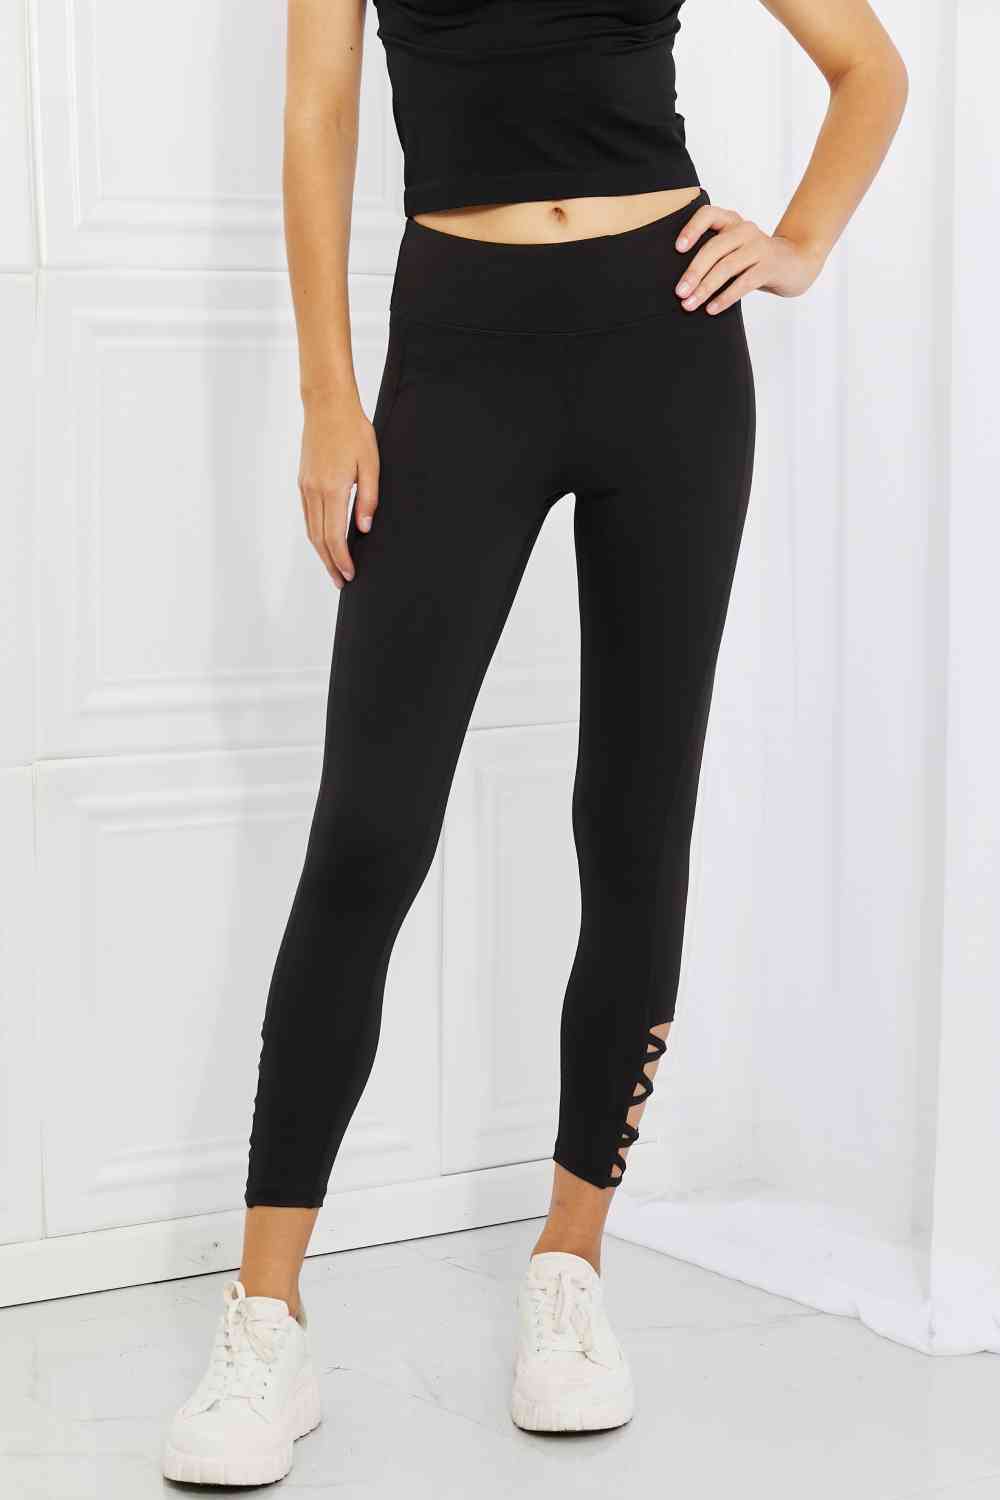 Womens Black Strappy Ankle Cutout Athletic Leggings